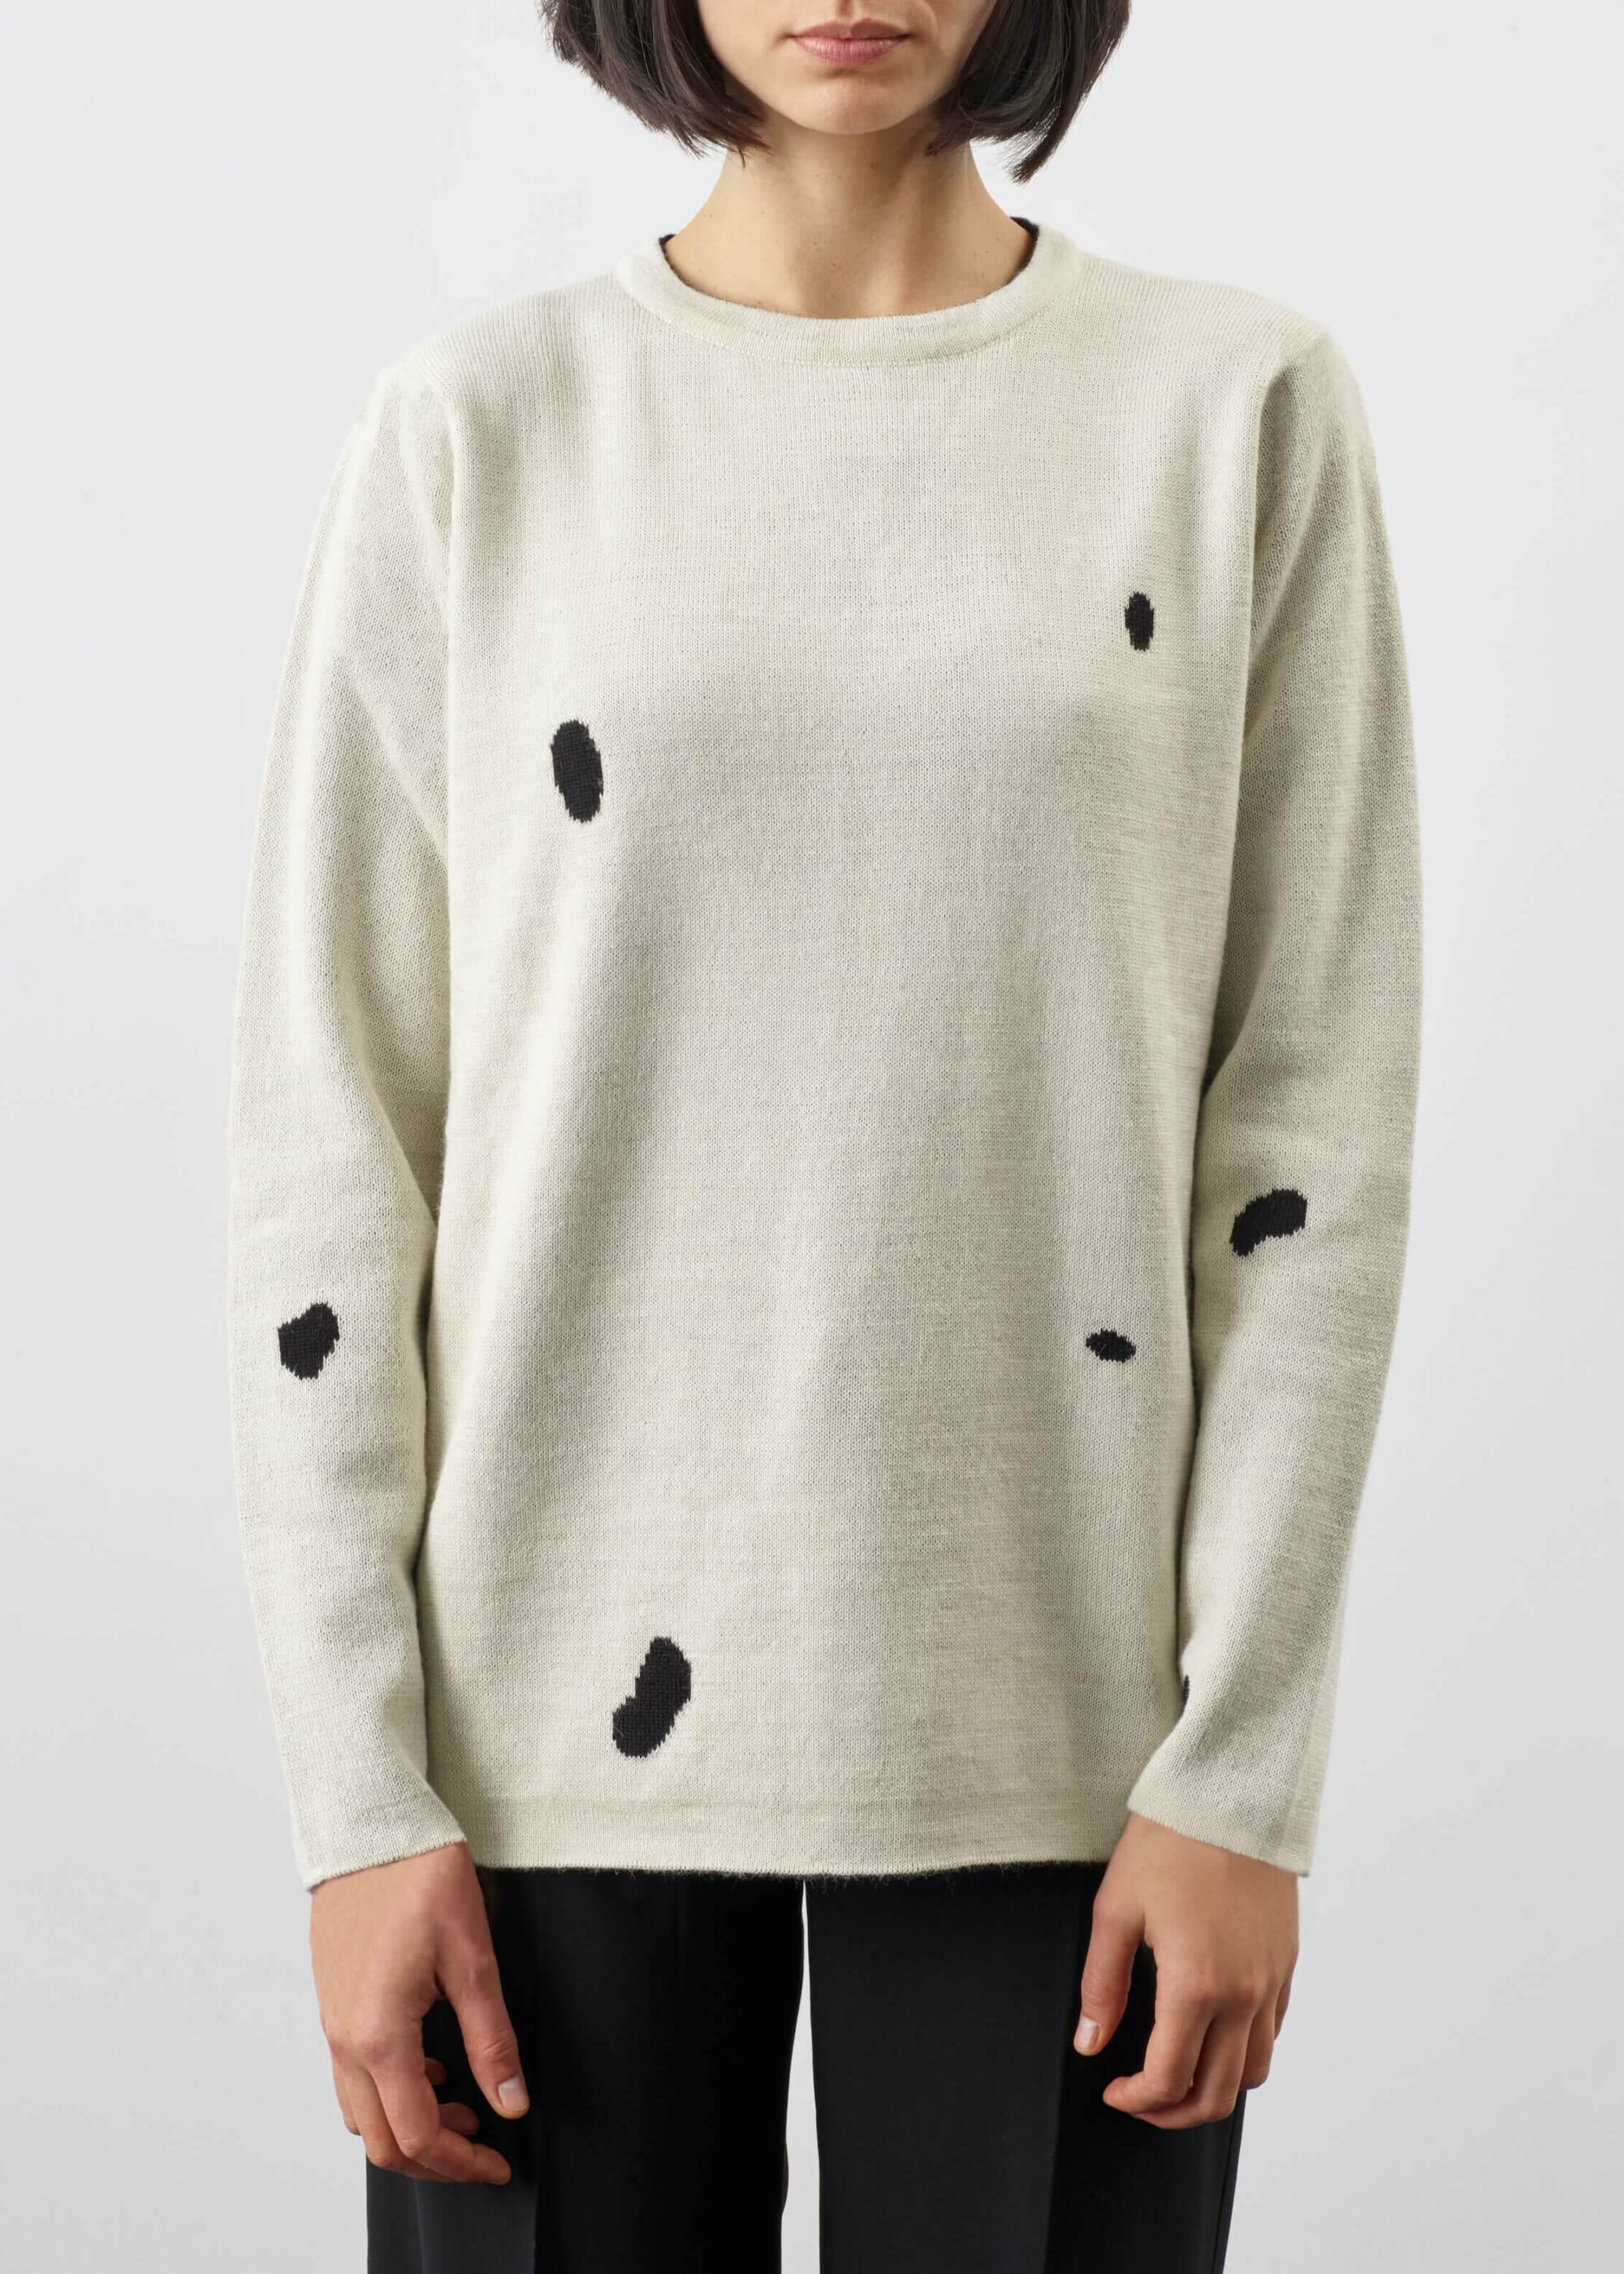 Product image for »Ermine« Jacquard Sweater Baby Alpaca